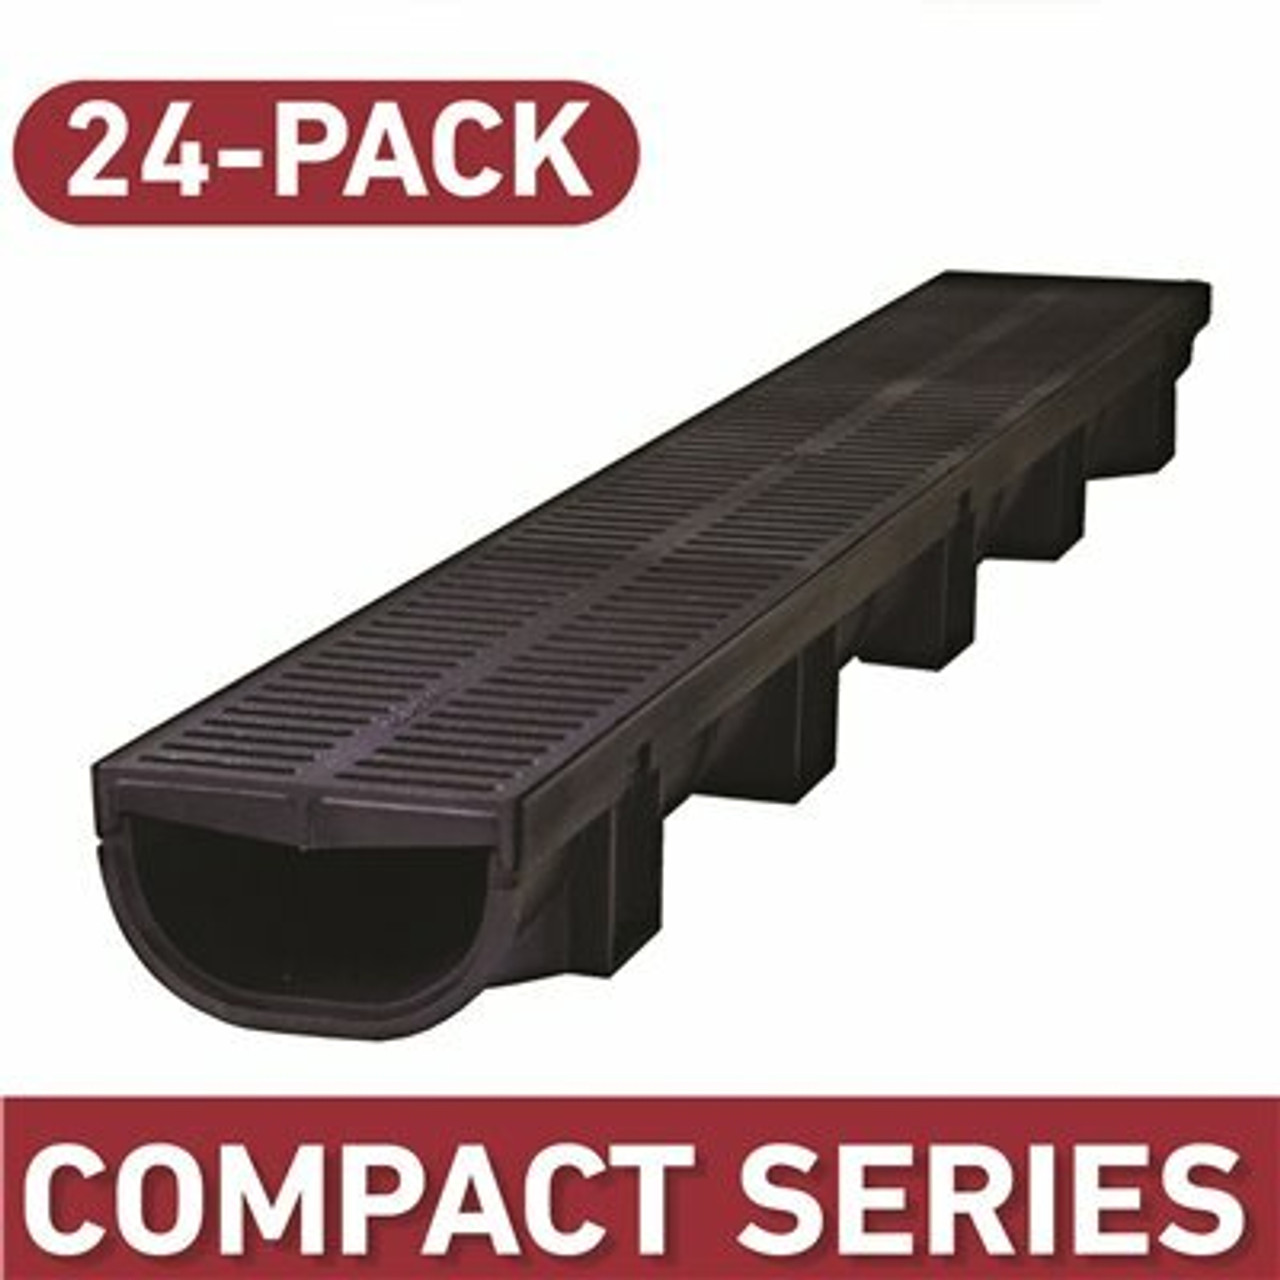 Compact Series 5.4 In. W X 3.2 In. D 39.4 In. L Trench And Channel Drain Kit W/ Black Grates (24-Pack | 78.8 Ft)